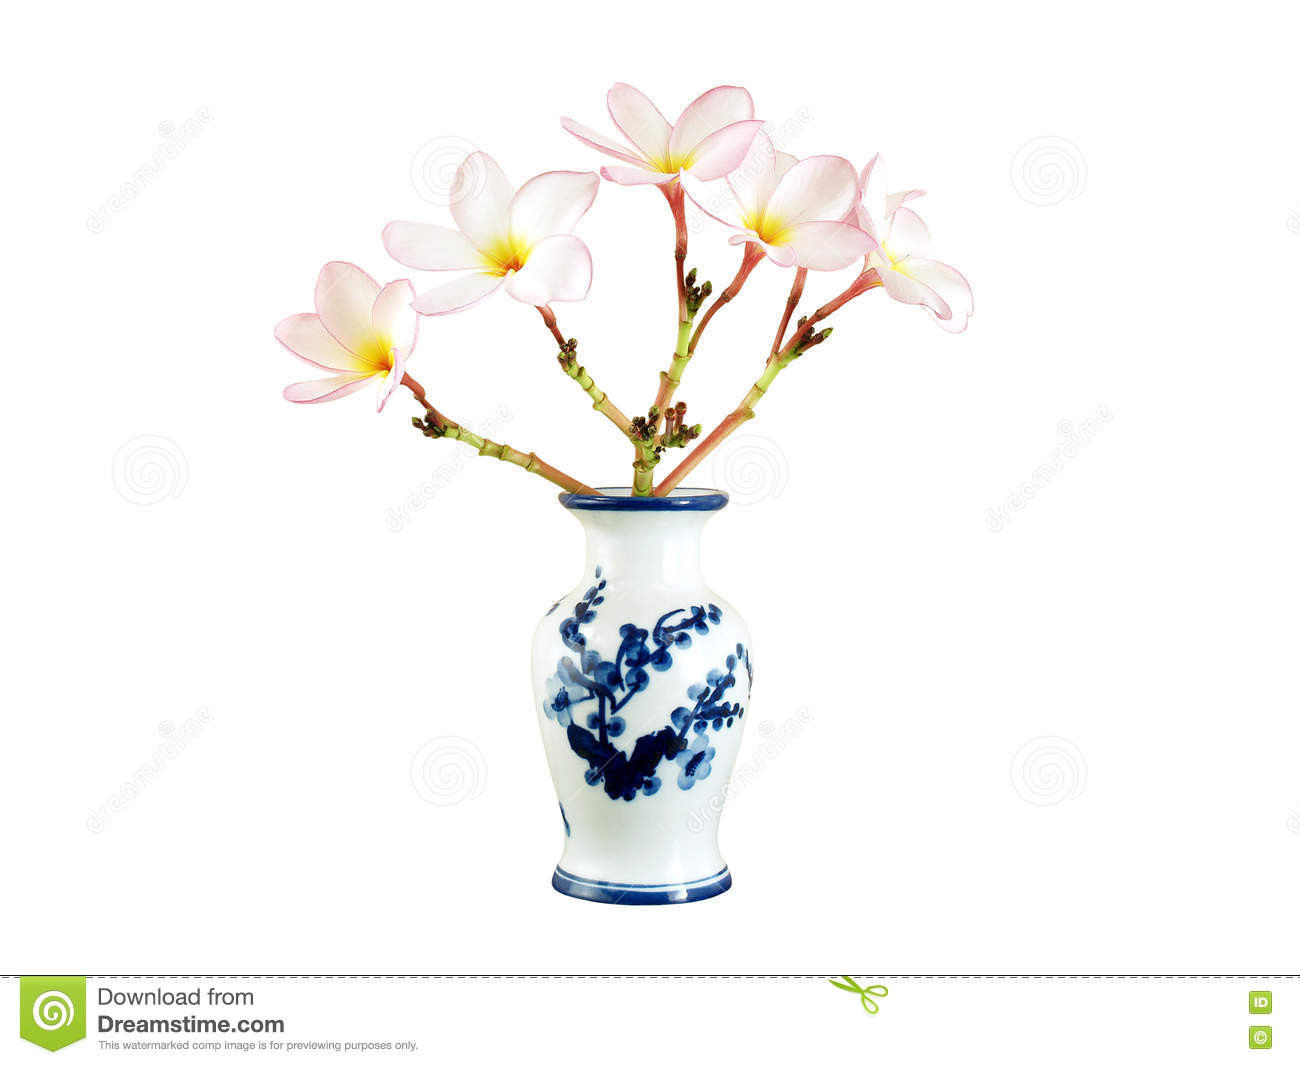 30 attractive White Flower Vases for Sale 2022 free download white flower vases for sale of beautiful bouquet light pink plumeria or frangipani in white chinese within beautiful bouquet light pink plumeria or frangipani in white chinese vase with blue